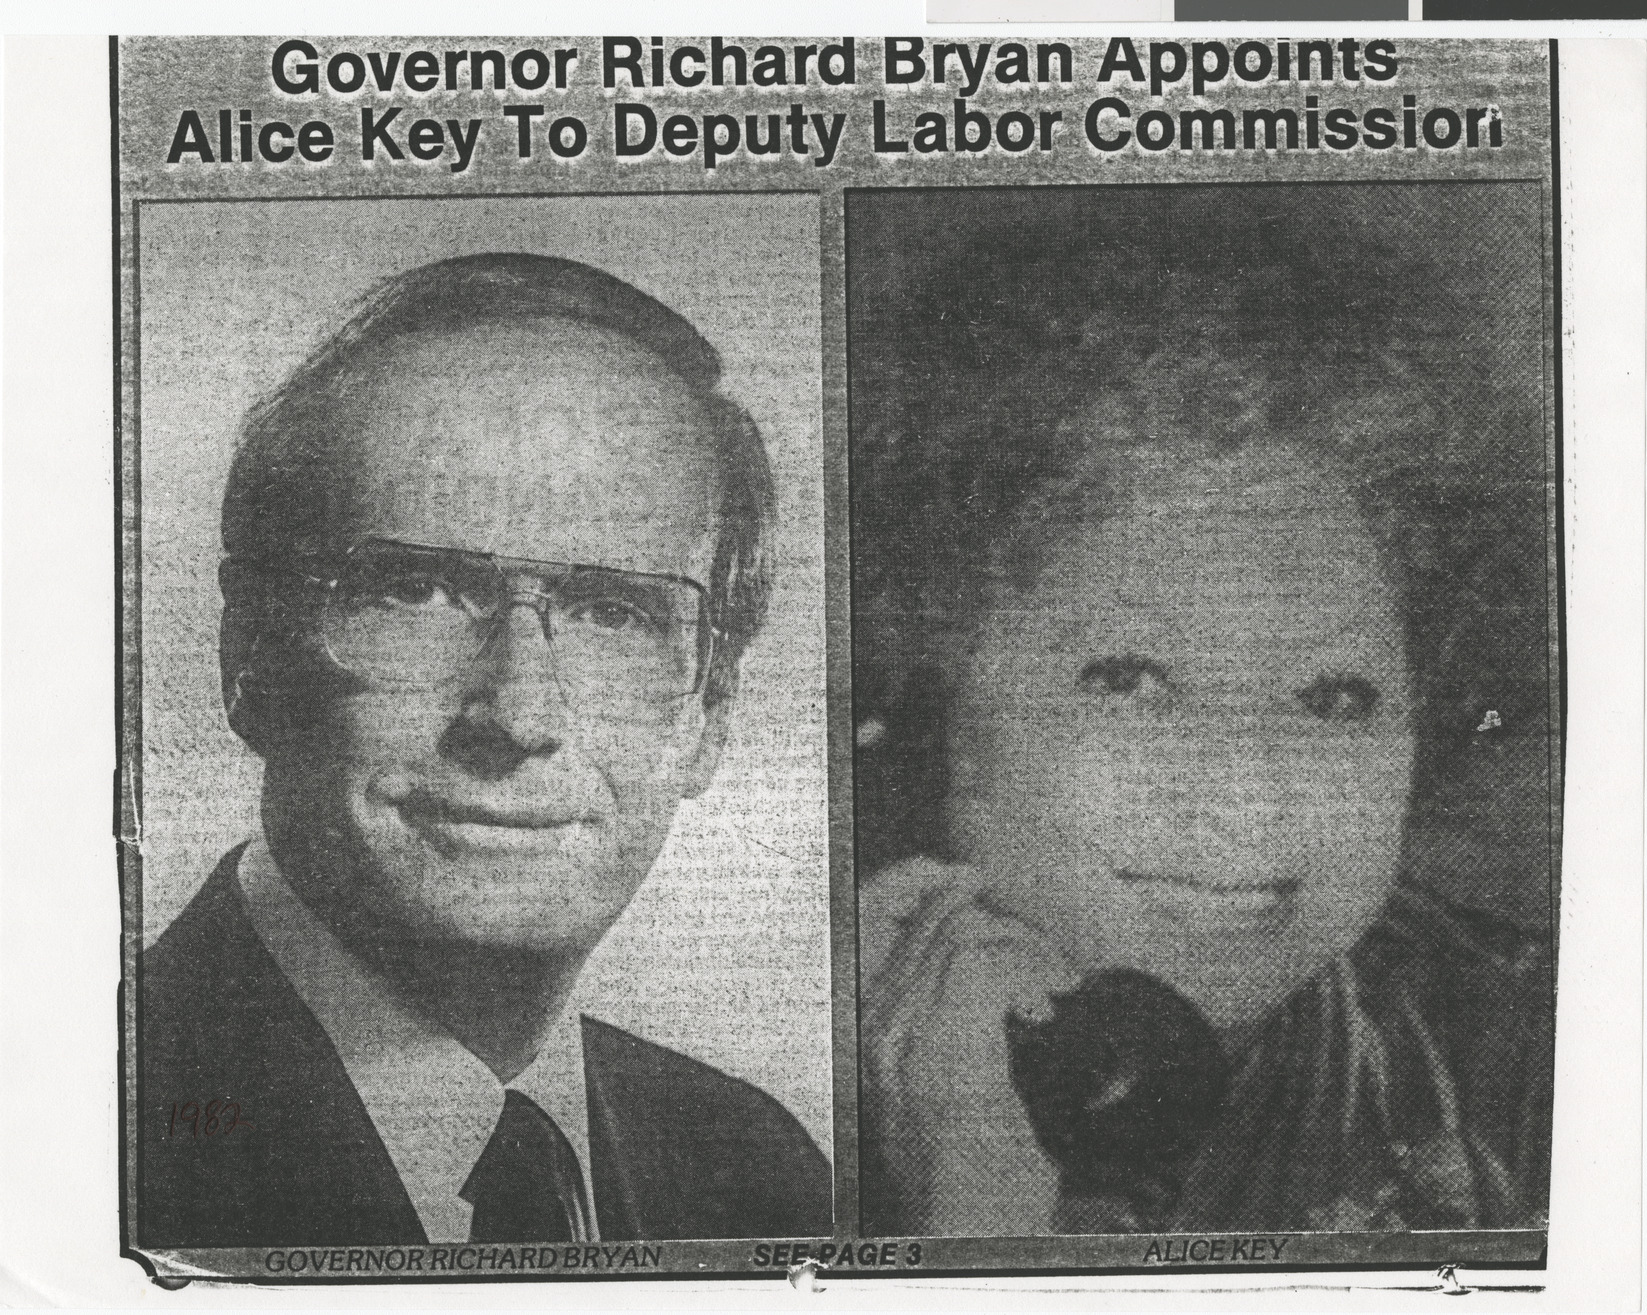 Newspaper clipping (copy), Governor Richard Bryan Appoints Alice Key to Deputy Labor Commissioner, publication unknown, no date